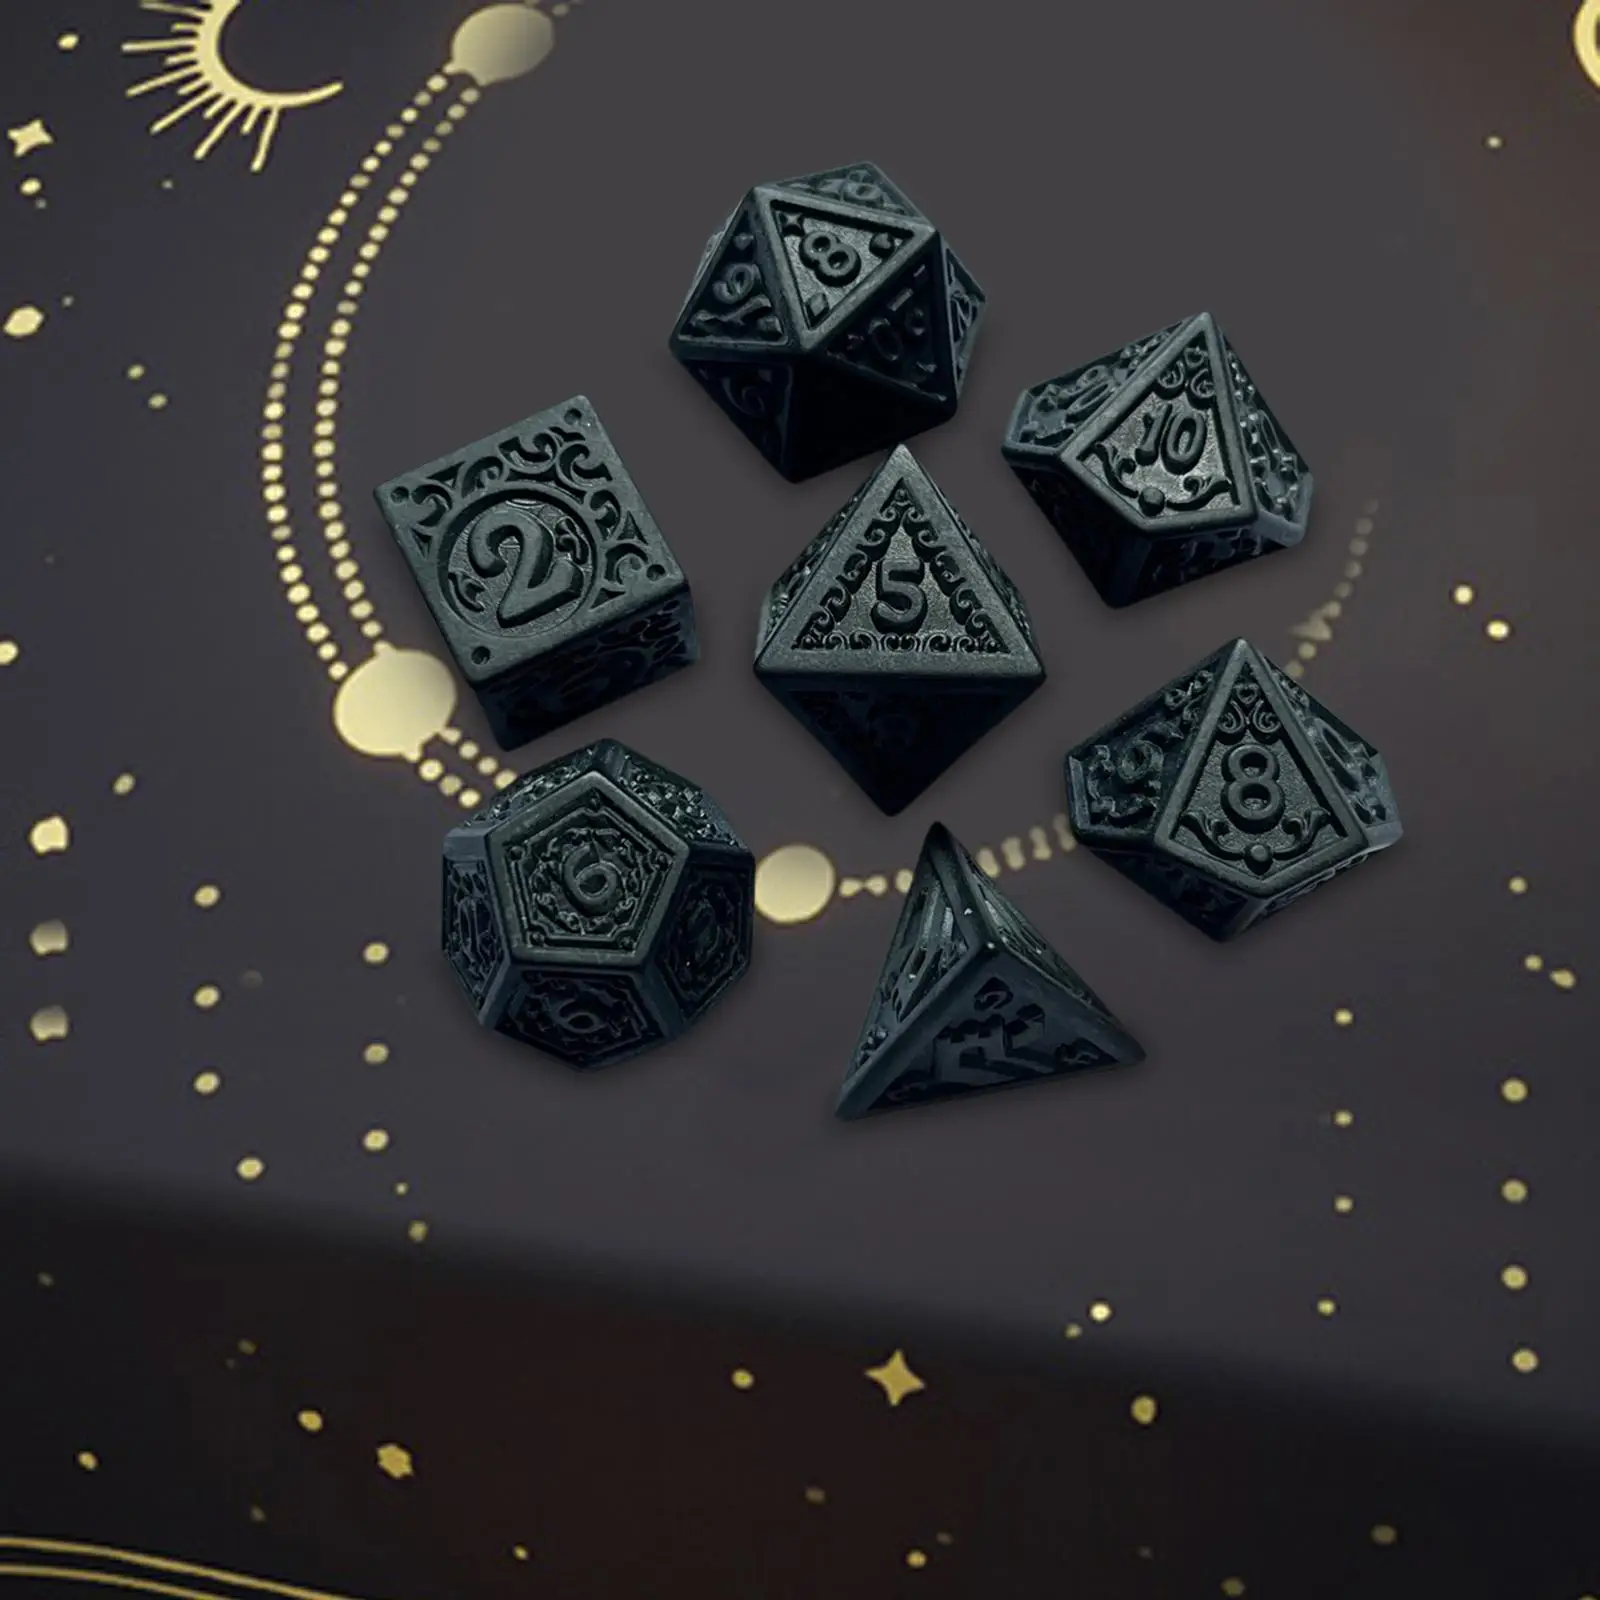 7Pcs Polyhedral Dice Gifts Board Games Party Favors Entertainment Toy Multisided Dice for Role Playing Game D4 D6 D8 D10 D12 D20